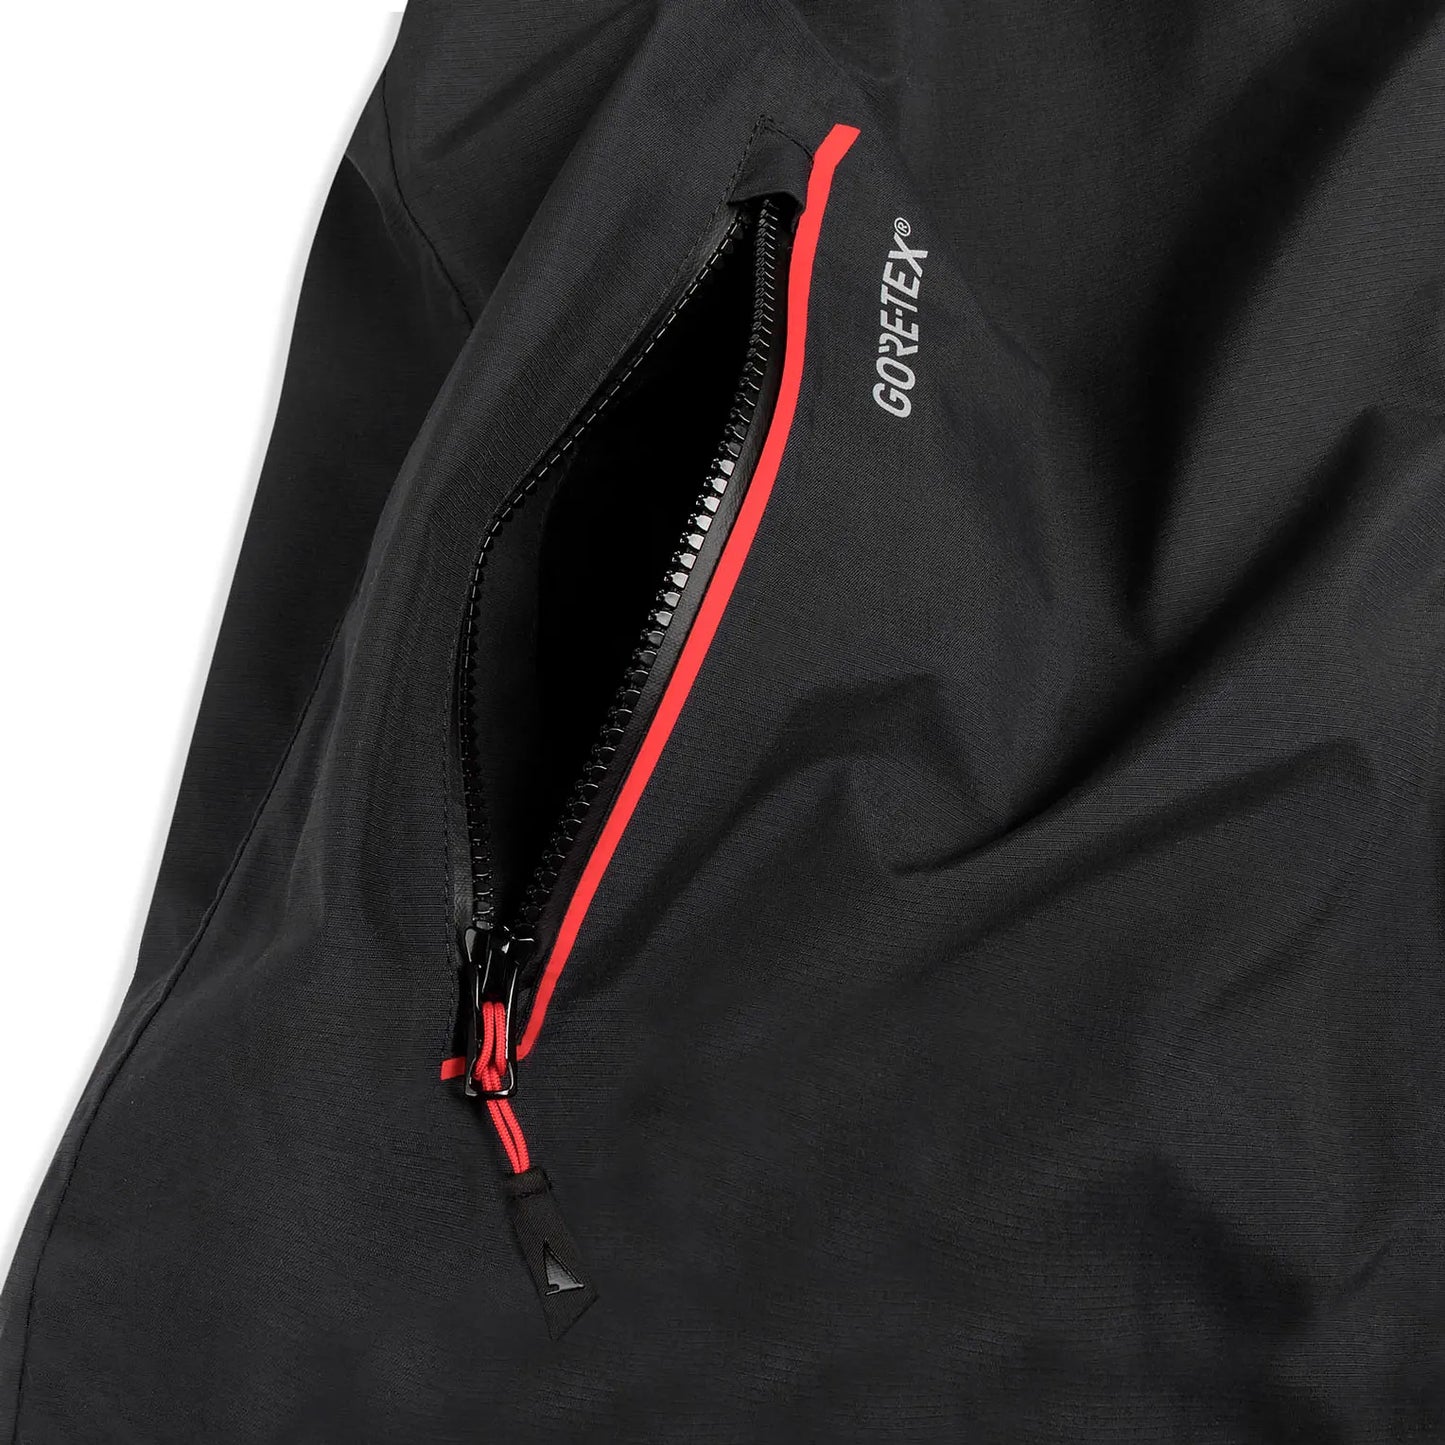 GORE-TEX® MIDDLE LAYER JACKET